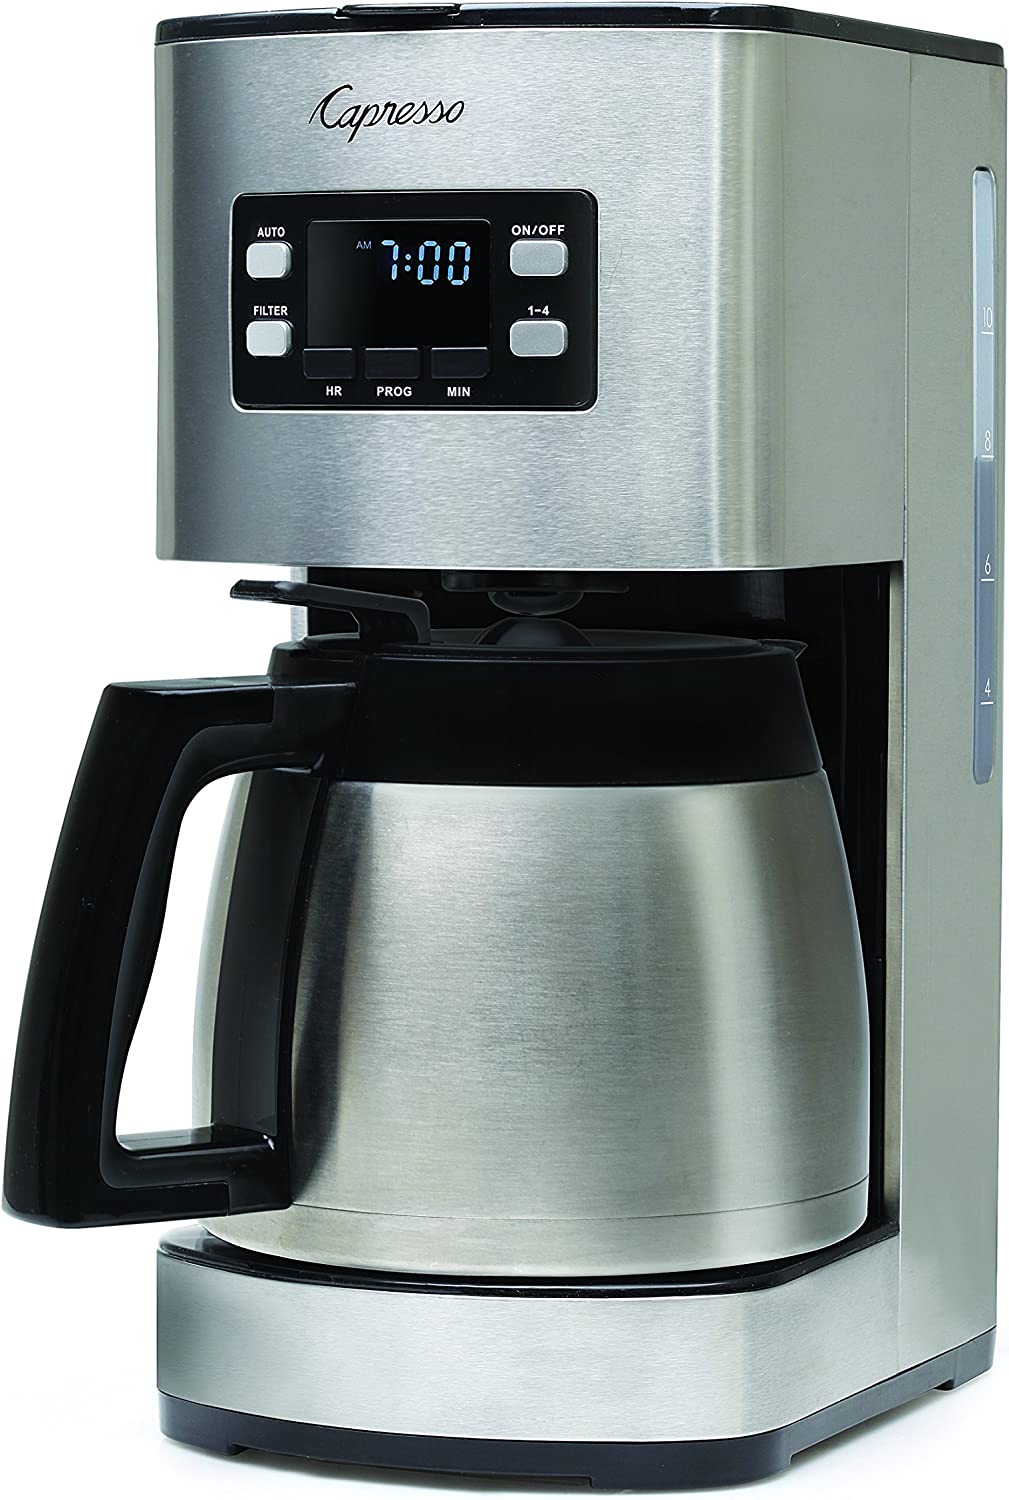 Capresso C435.05 ST300 10 Cup Thermal Coffee Maker - Certified Refurbished